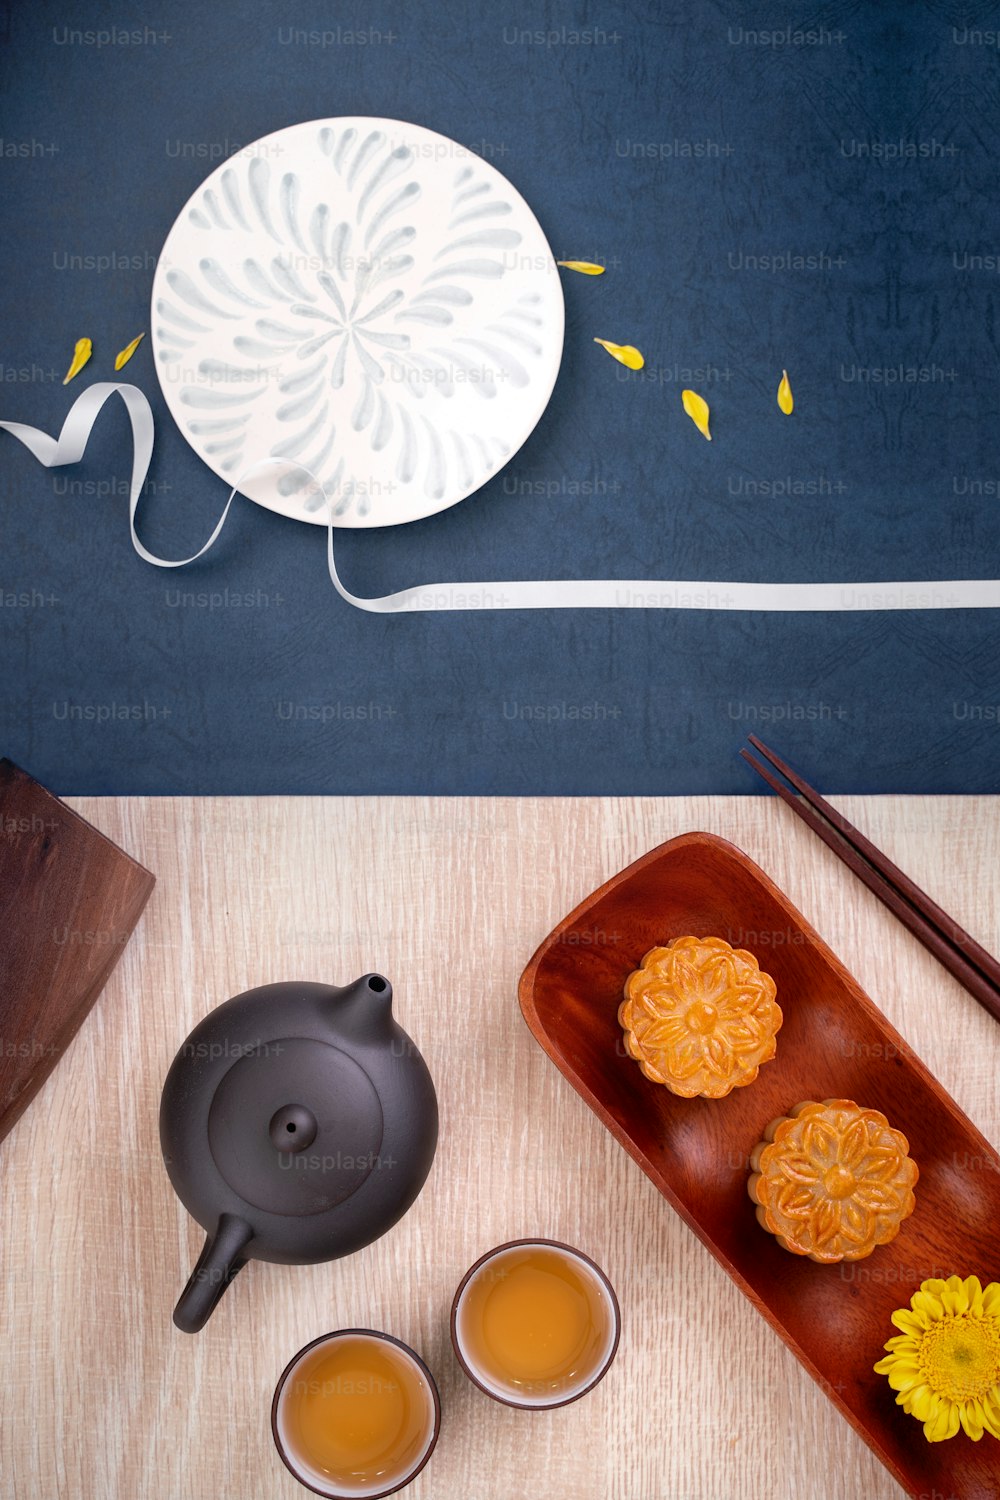 Creative Moon cake Mooncake design inspiration, enjoy the moon in Mid-Autumn festival with pastry and tea on wooden table concept, top view, flat lay